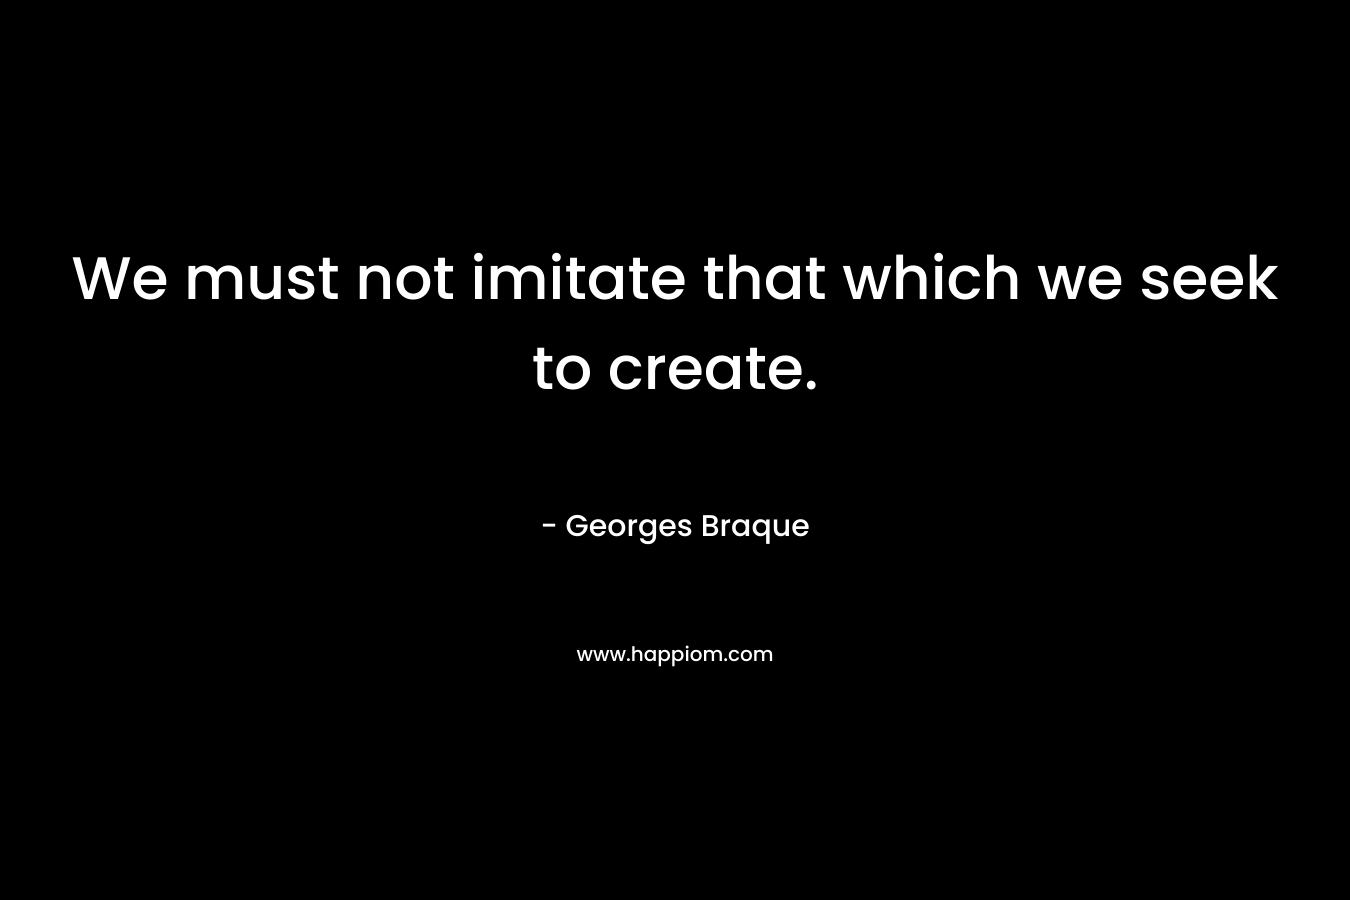 We must not imitate that which we seek to create.